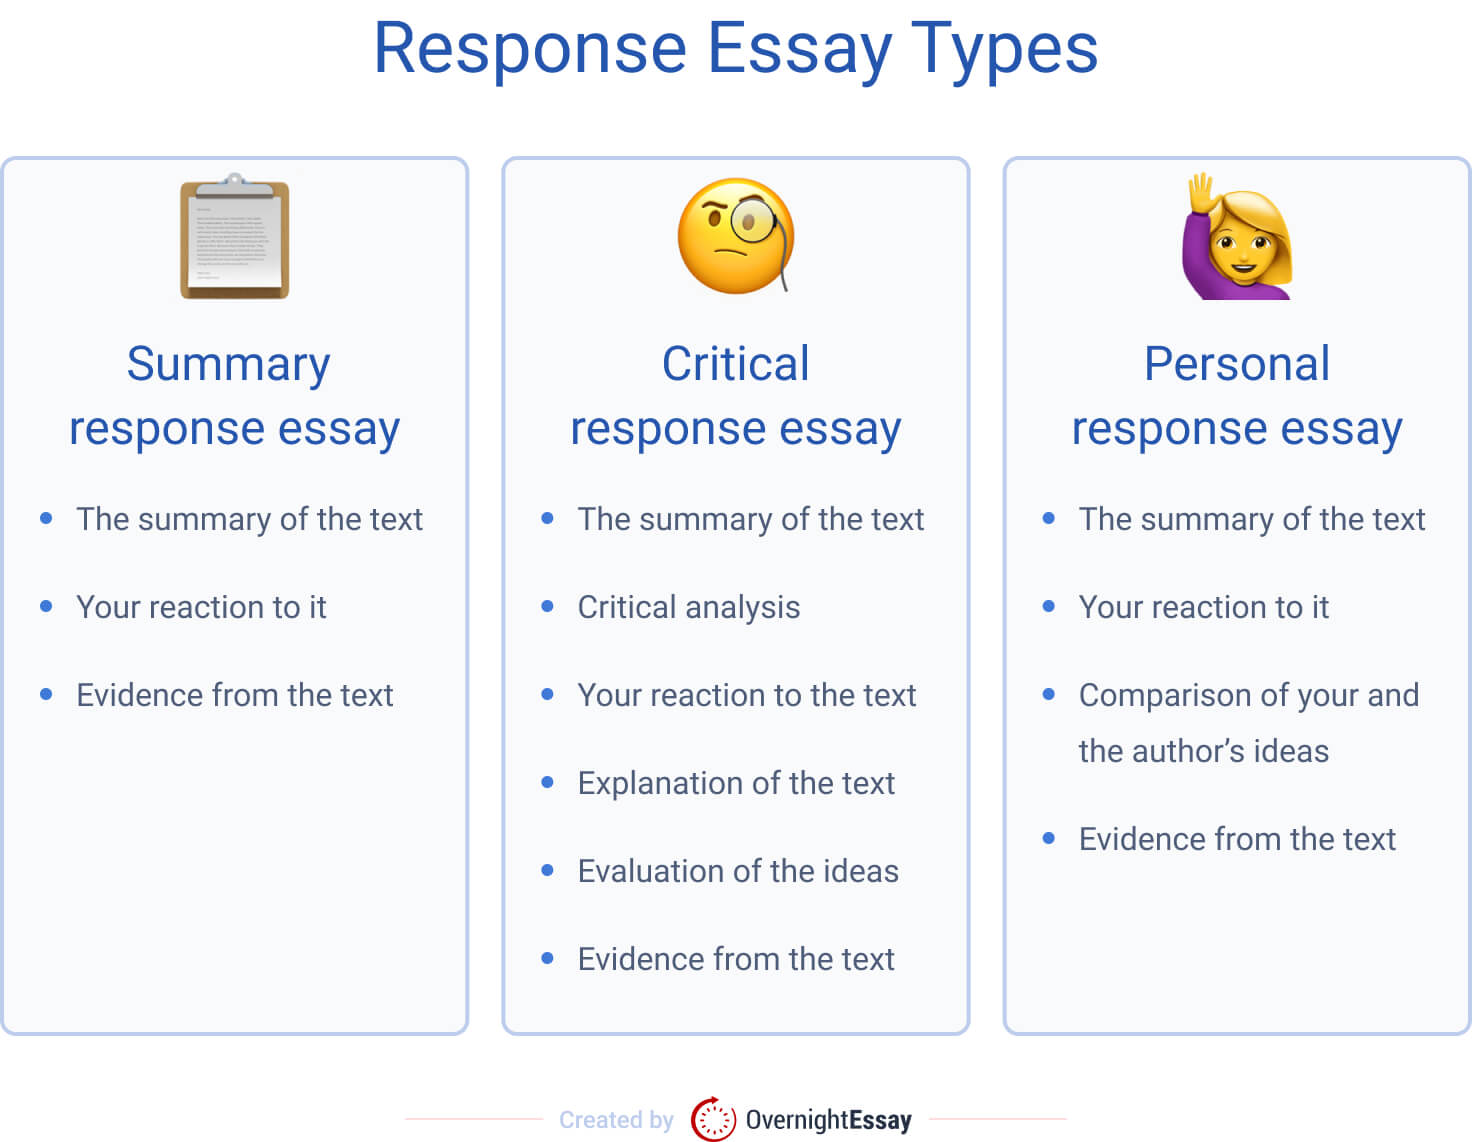 How to Write a Reaction Paper: Outline, Tips, & Response Essay